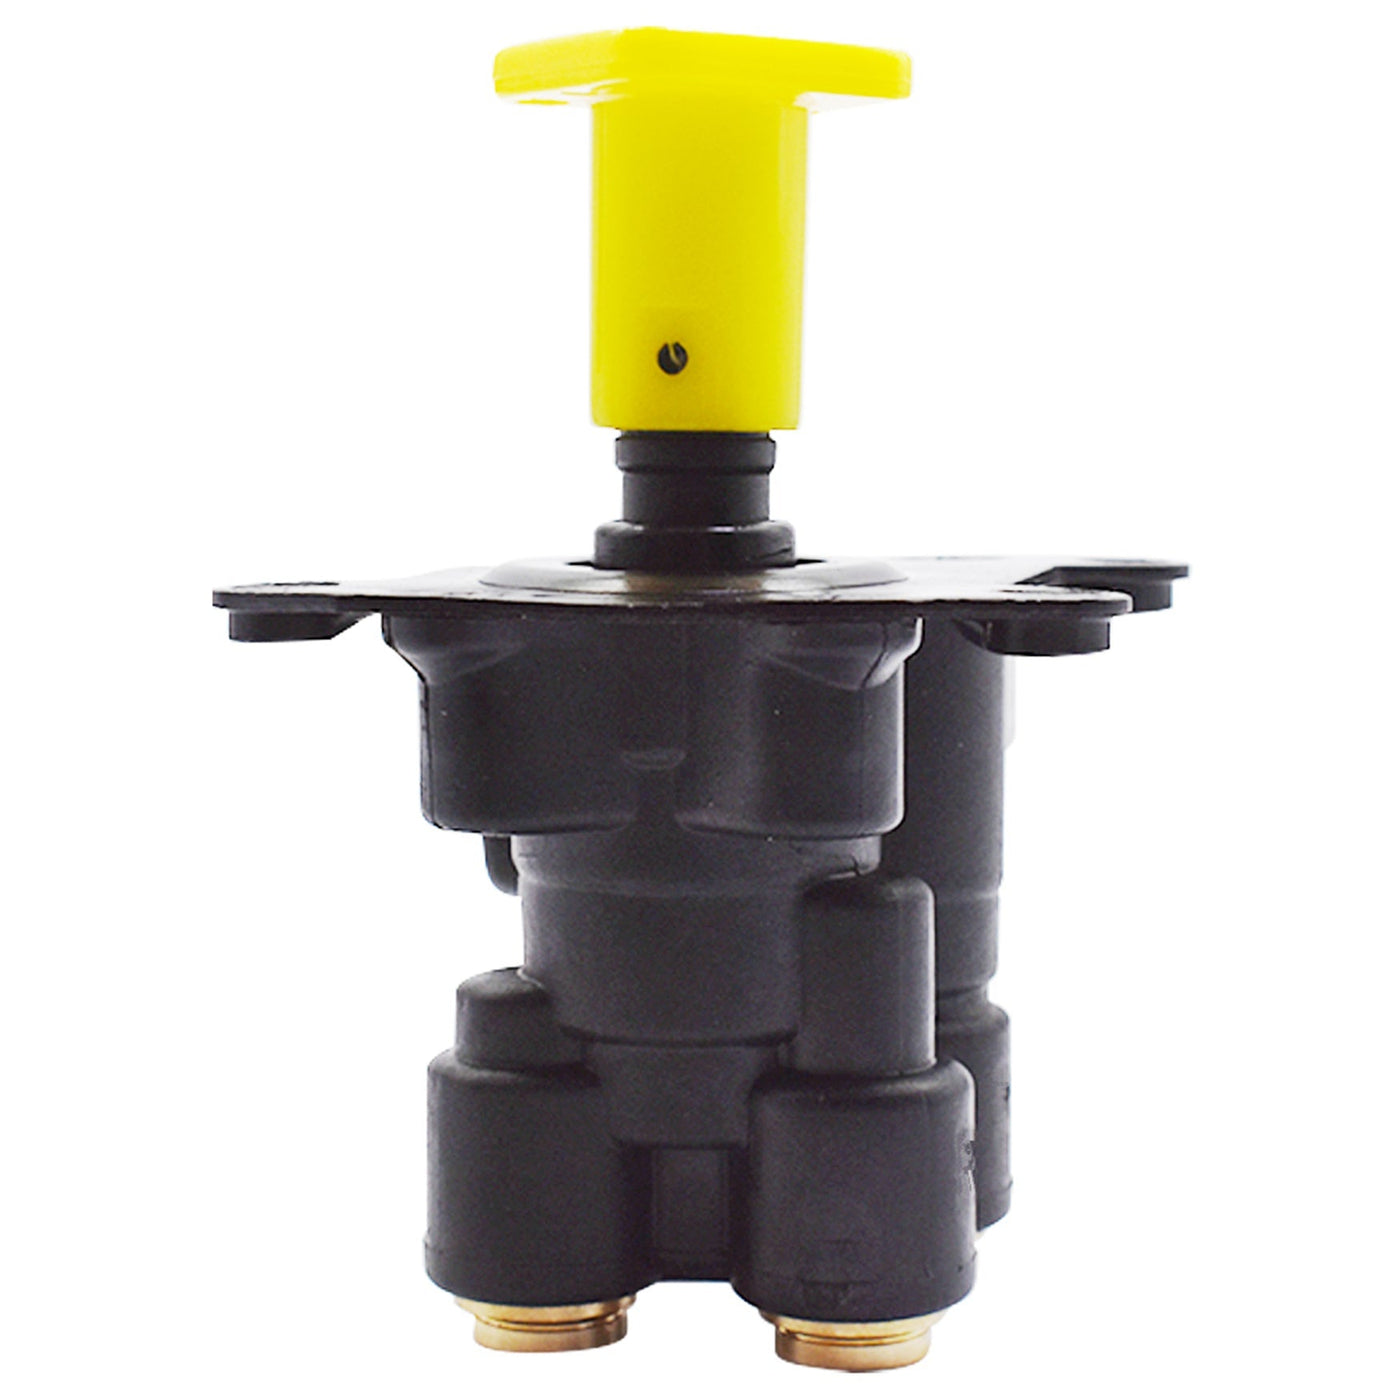 PP-DC Hand Operated Dash Truck/Bus Control Valve 065661, 800733